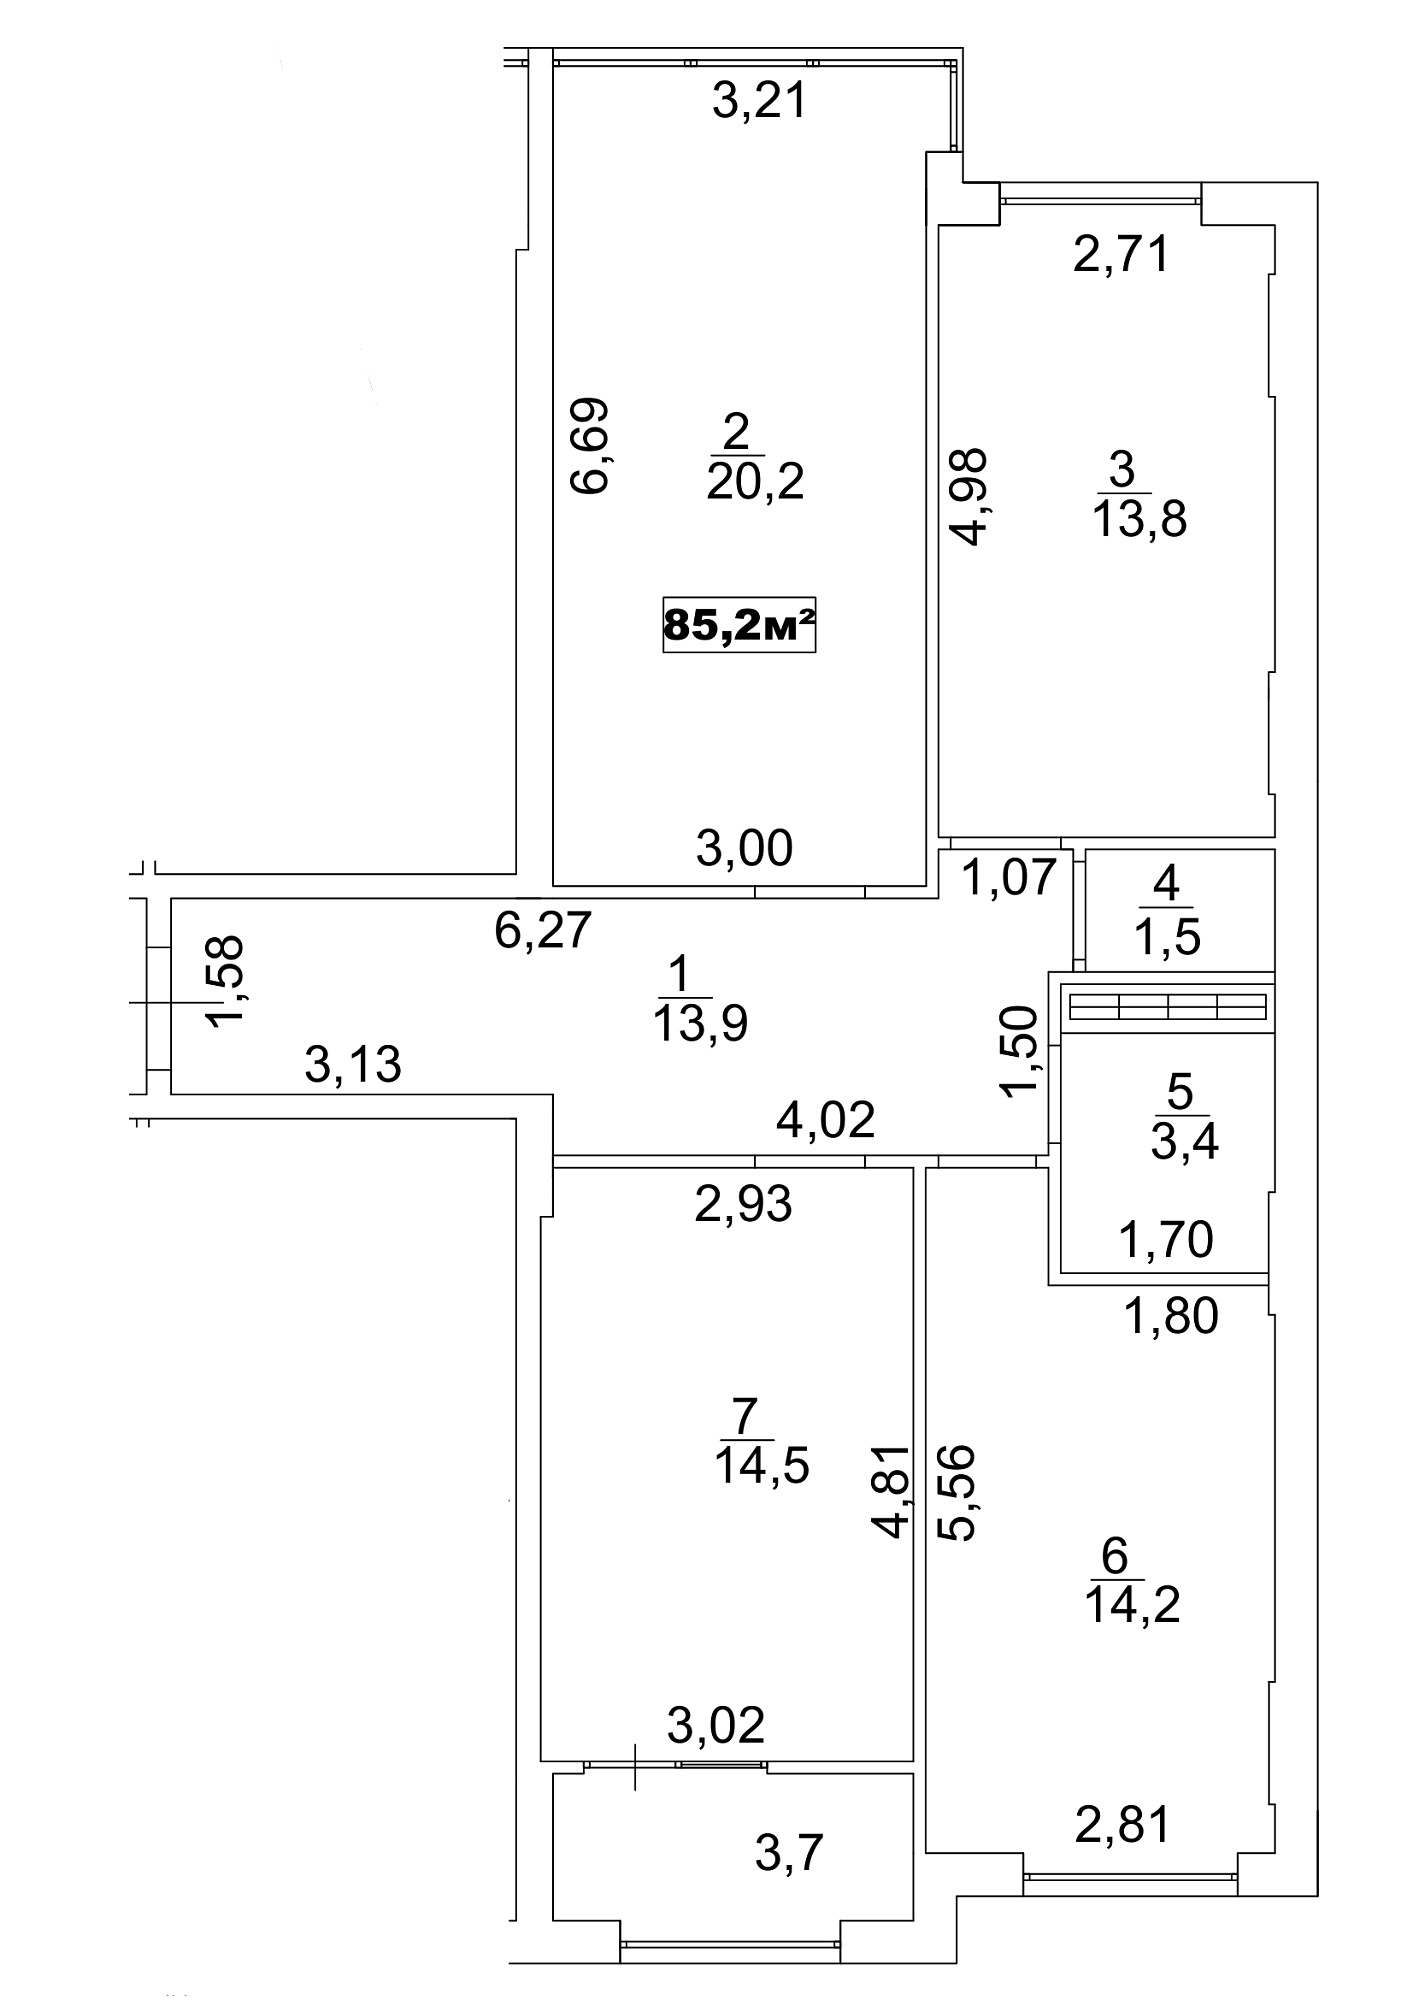 Planning 3-rm flats area 85.2m2, AB-13-04/00031.